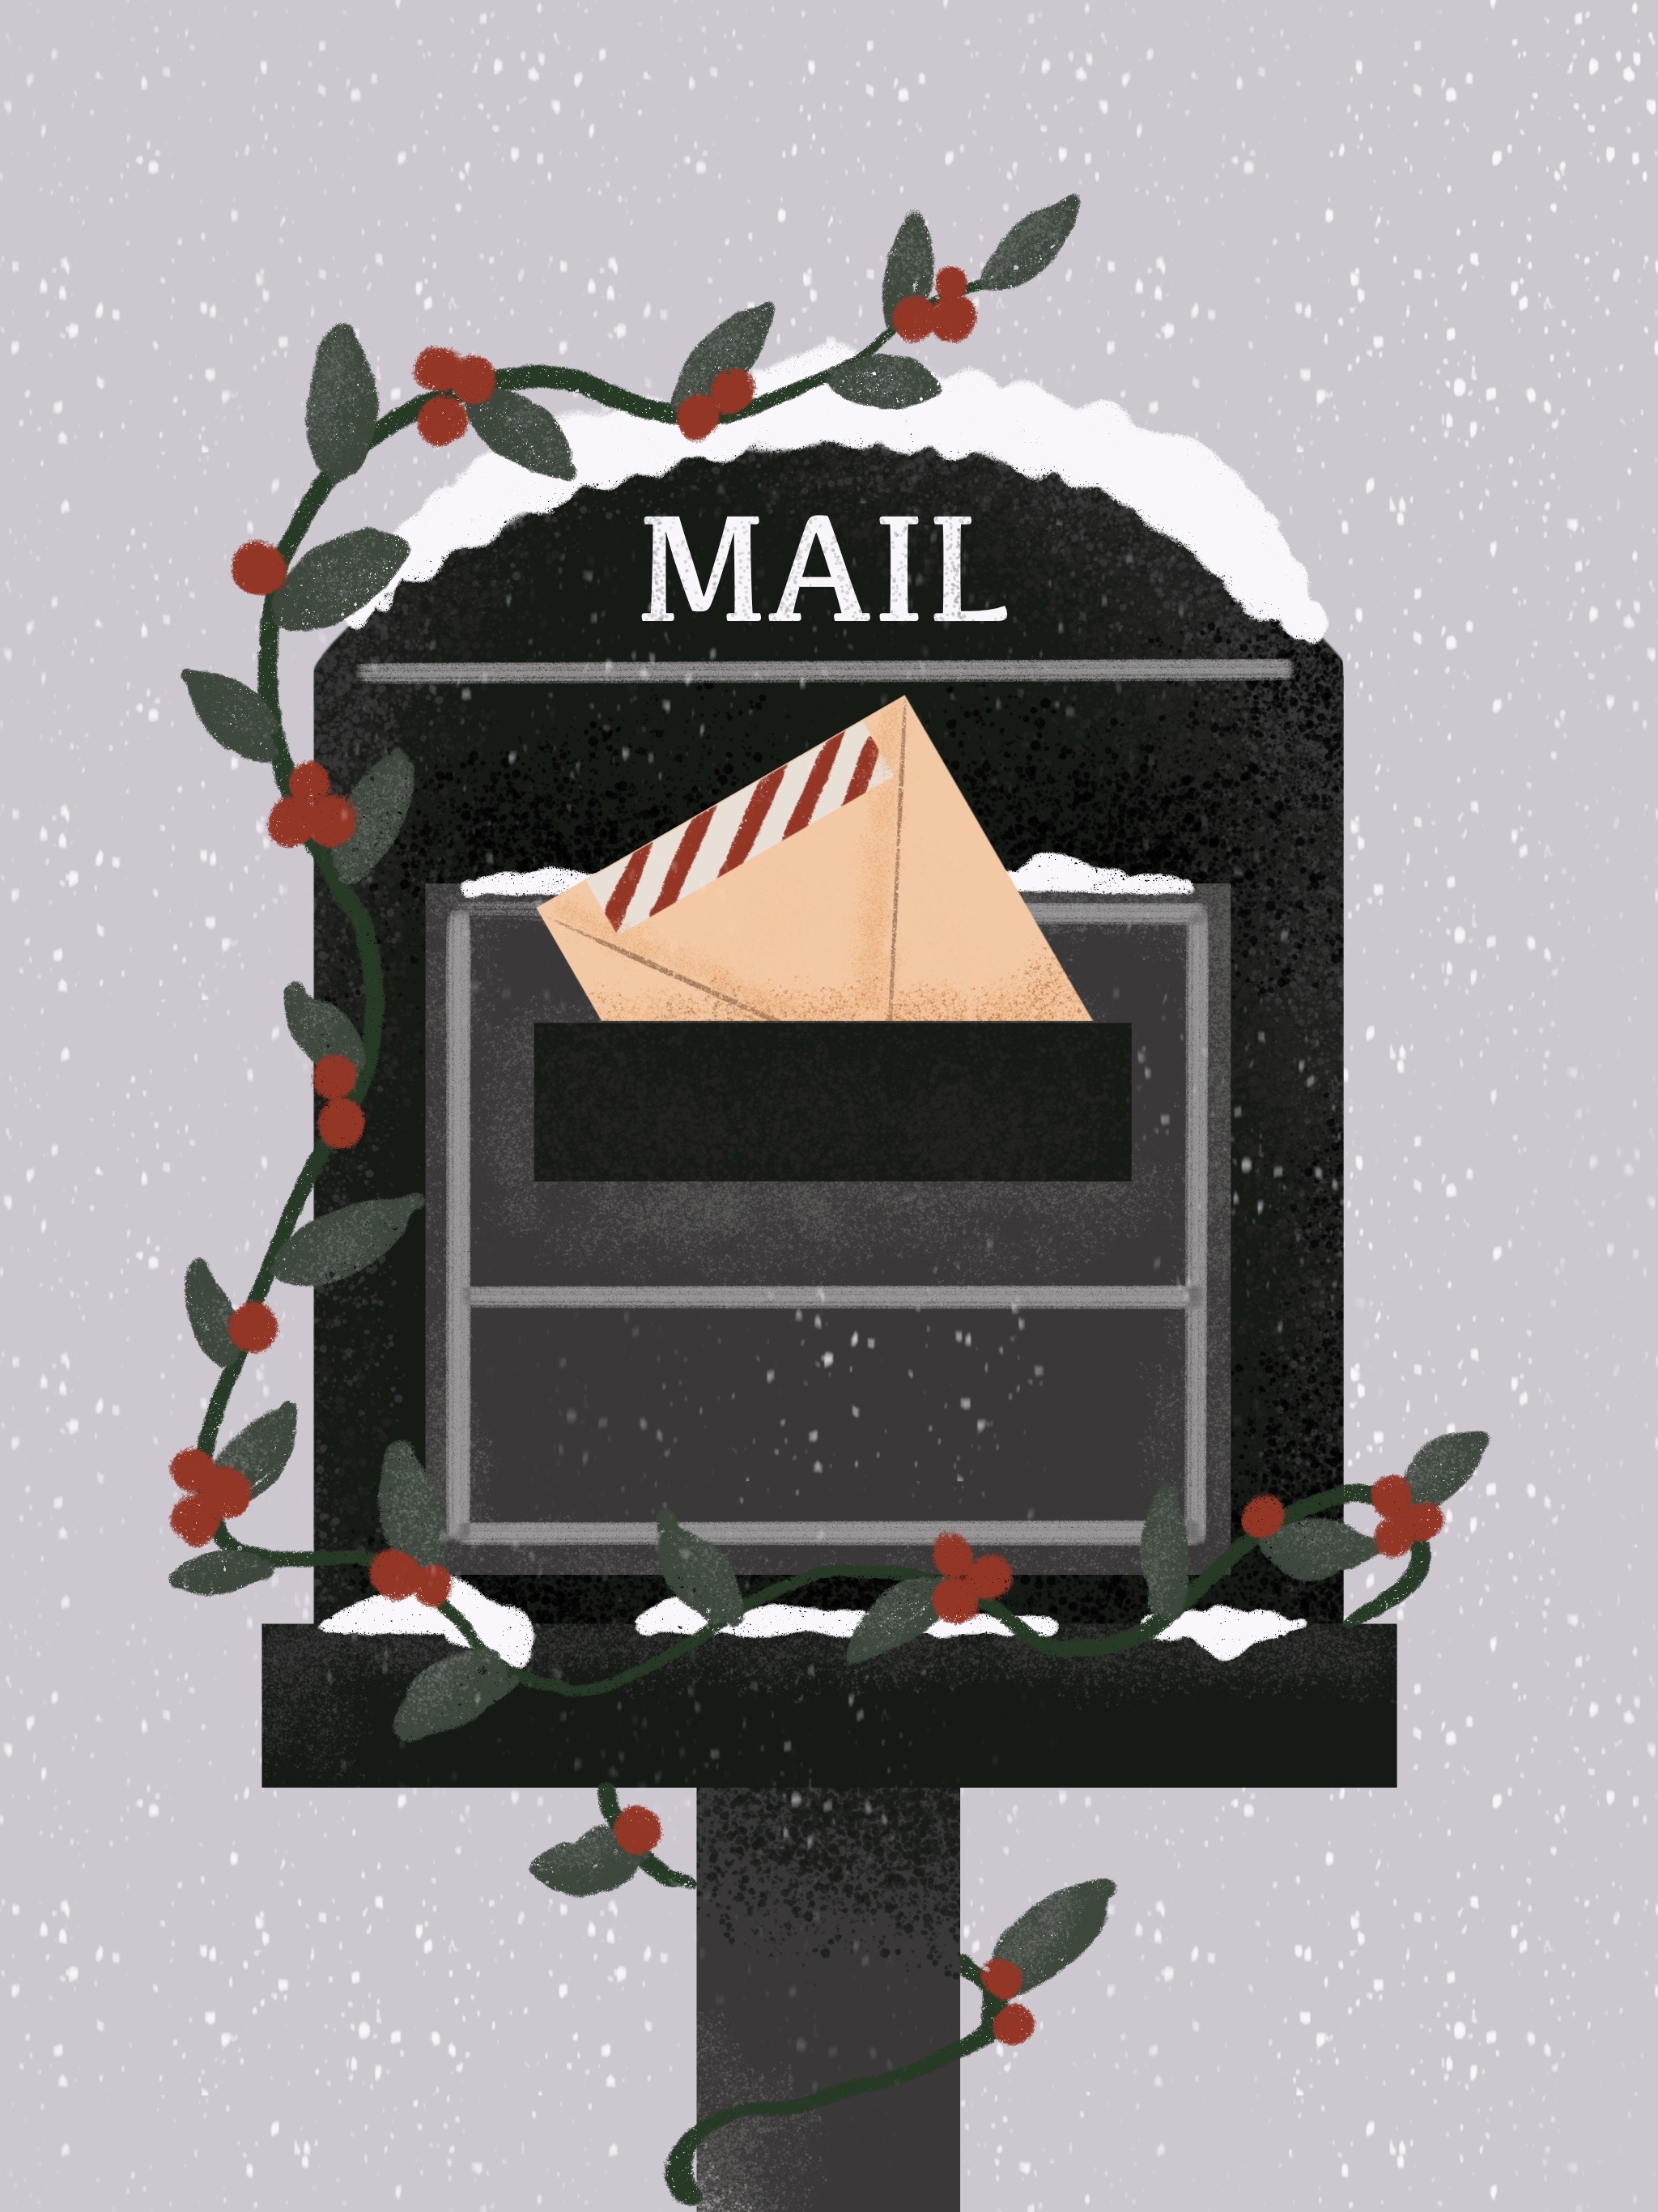 drawing of a vintage style mailbox with show and wintery vines with an envelop in the slot.